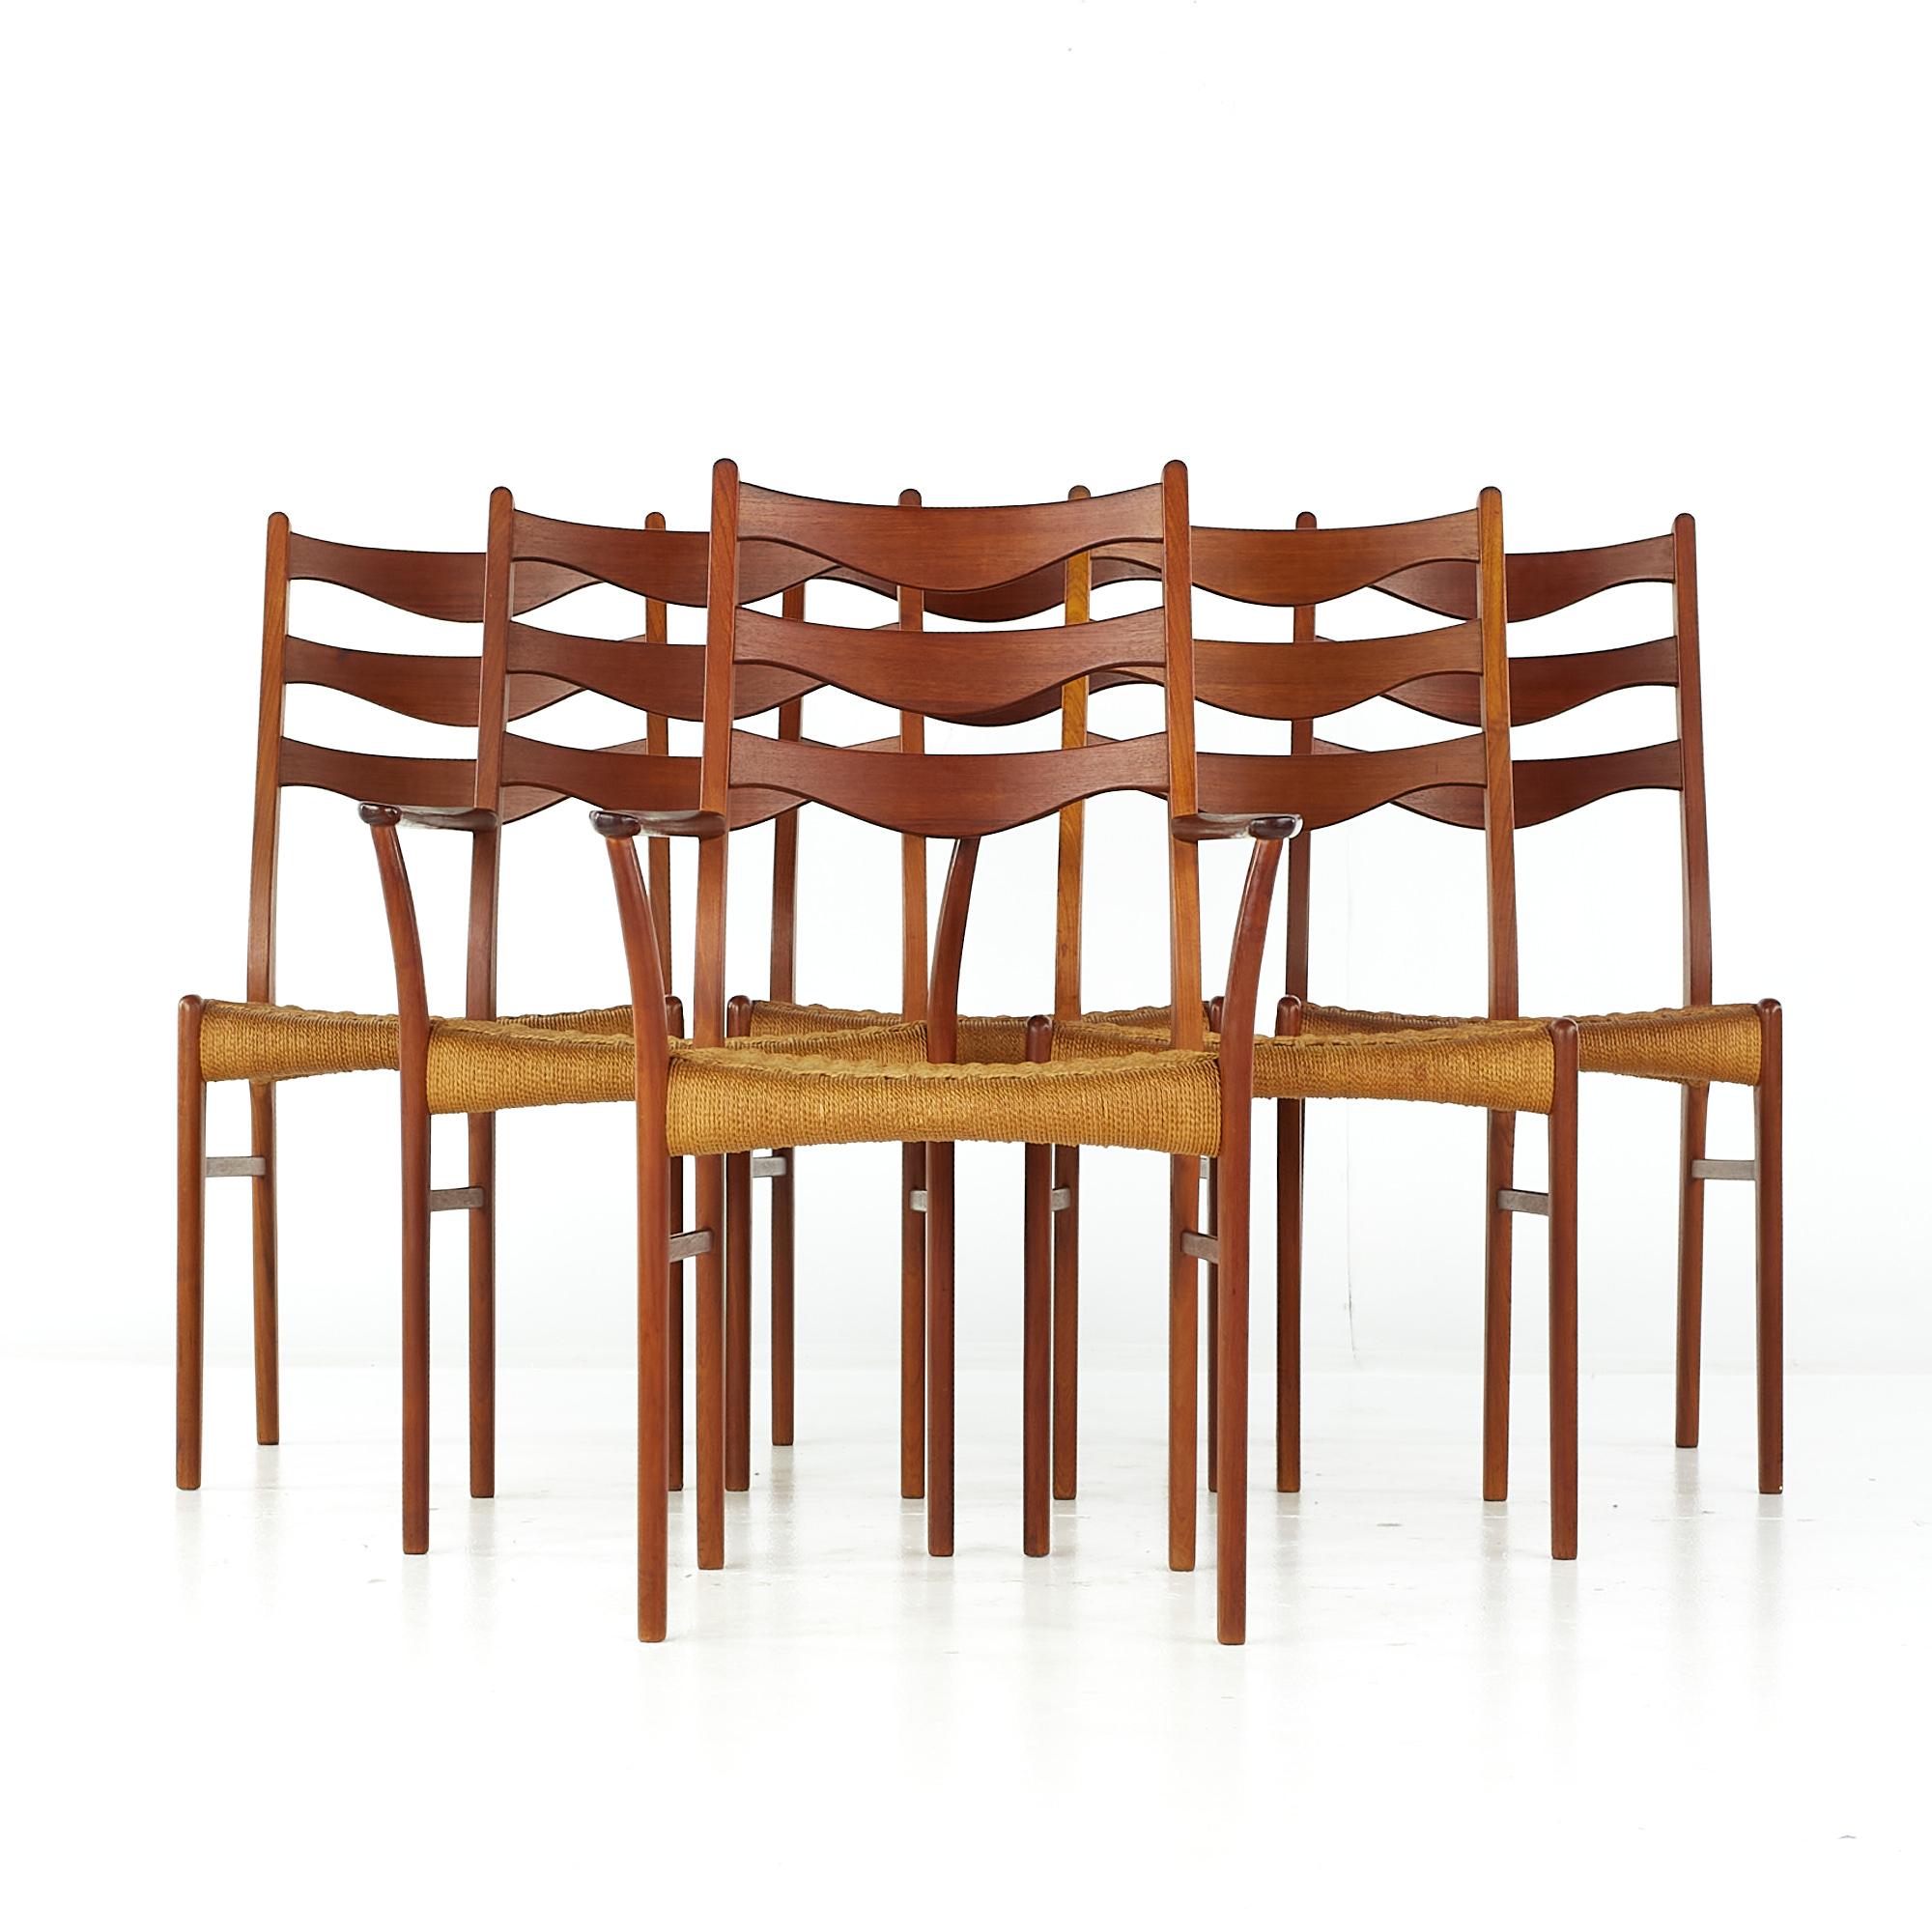 Arne Wahl Iversen GS90 mid century danish teak dining chairs with rope seats - set of 6

Each armless chair measures: 18.5 wide x 17 deep x 37 high, with a seat height of 17.25 inches
Each captains chair measures: 22.25 wide x 17 deep x 37 high,